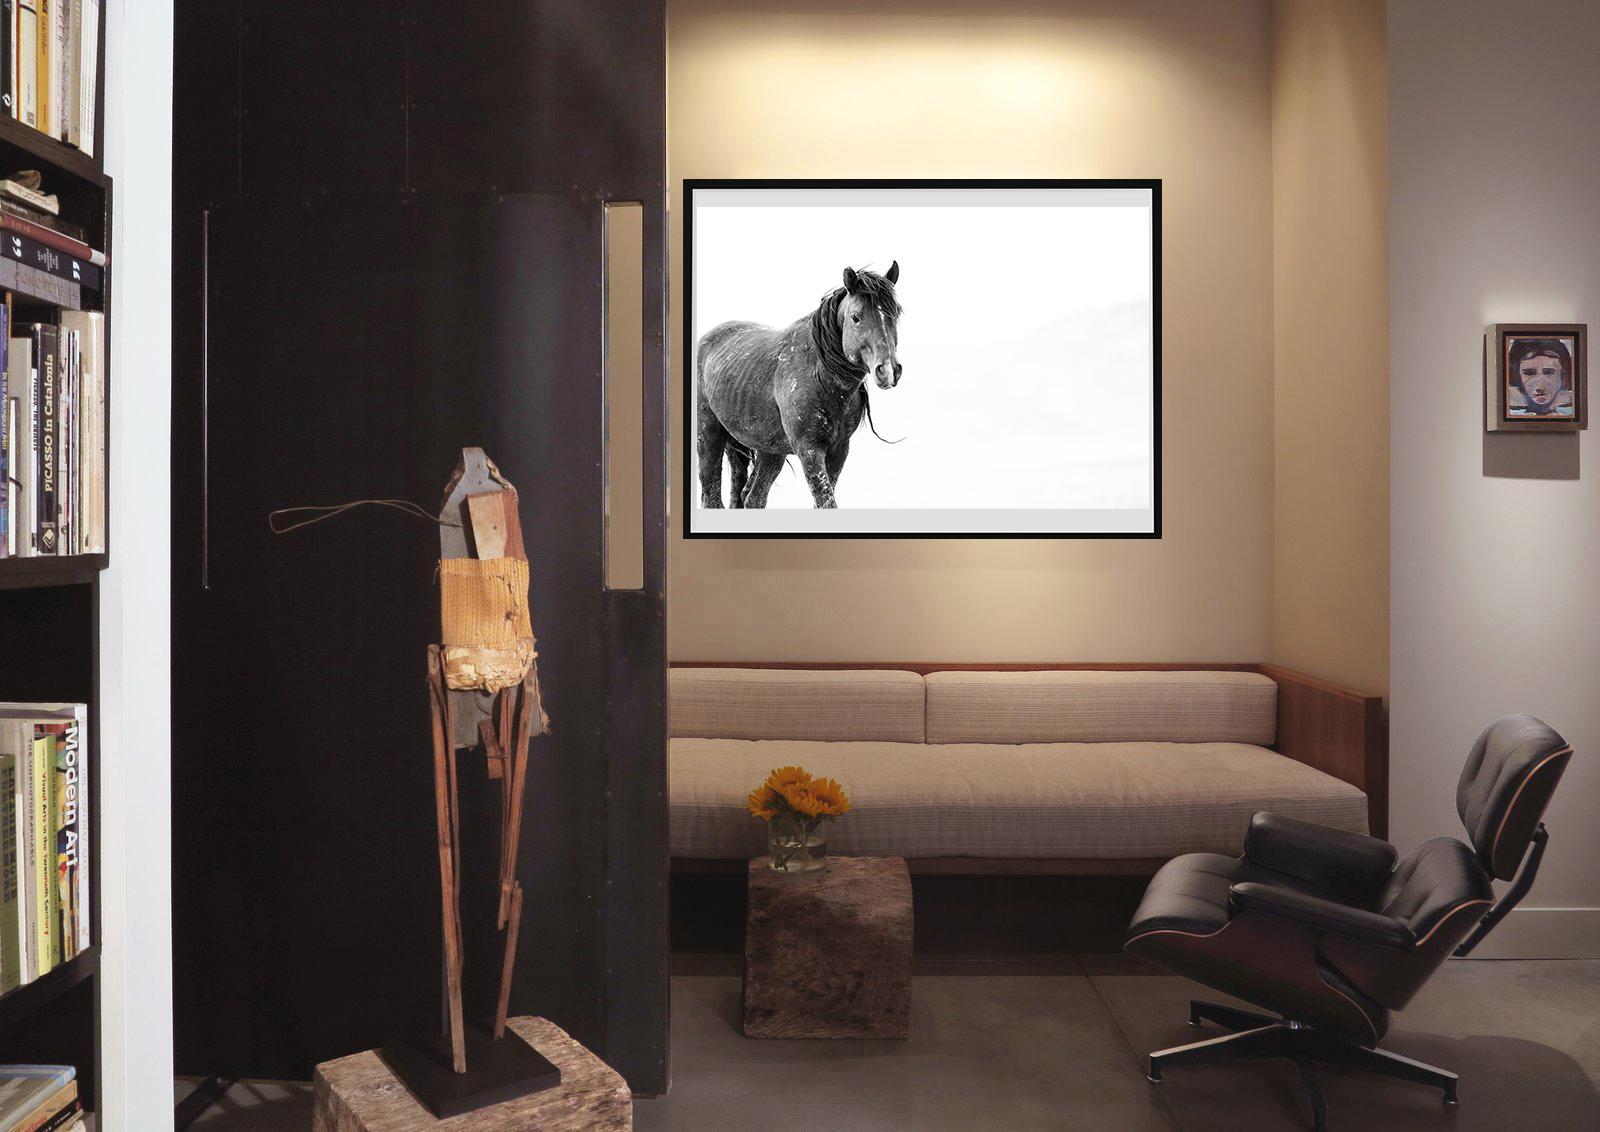 This is a contemporary photograph of a North American Wild Mustang
48x36 Edition of 12. Signed by Shane in the bottom corner. 
Archival pigment paper
Framing available. Inquire for rates. 


Shane Russeck has built a reputation for capturing